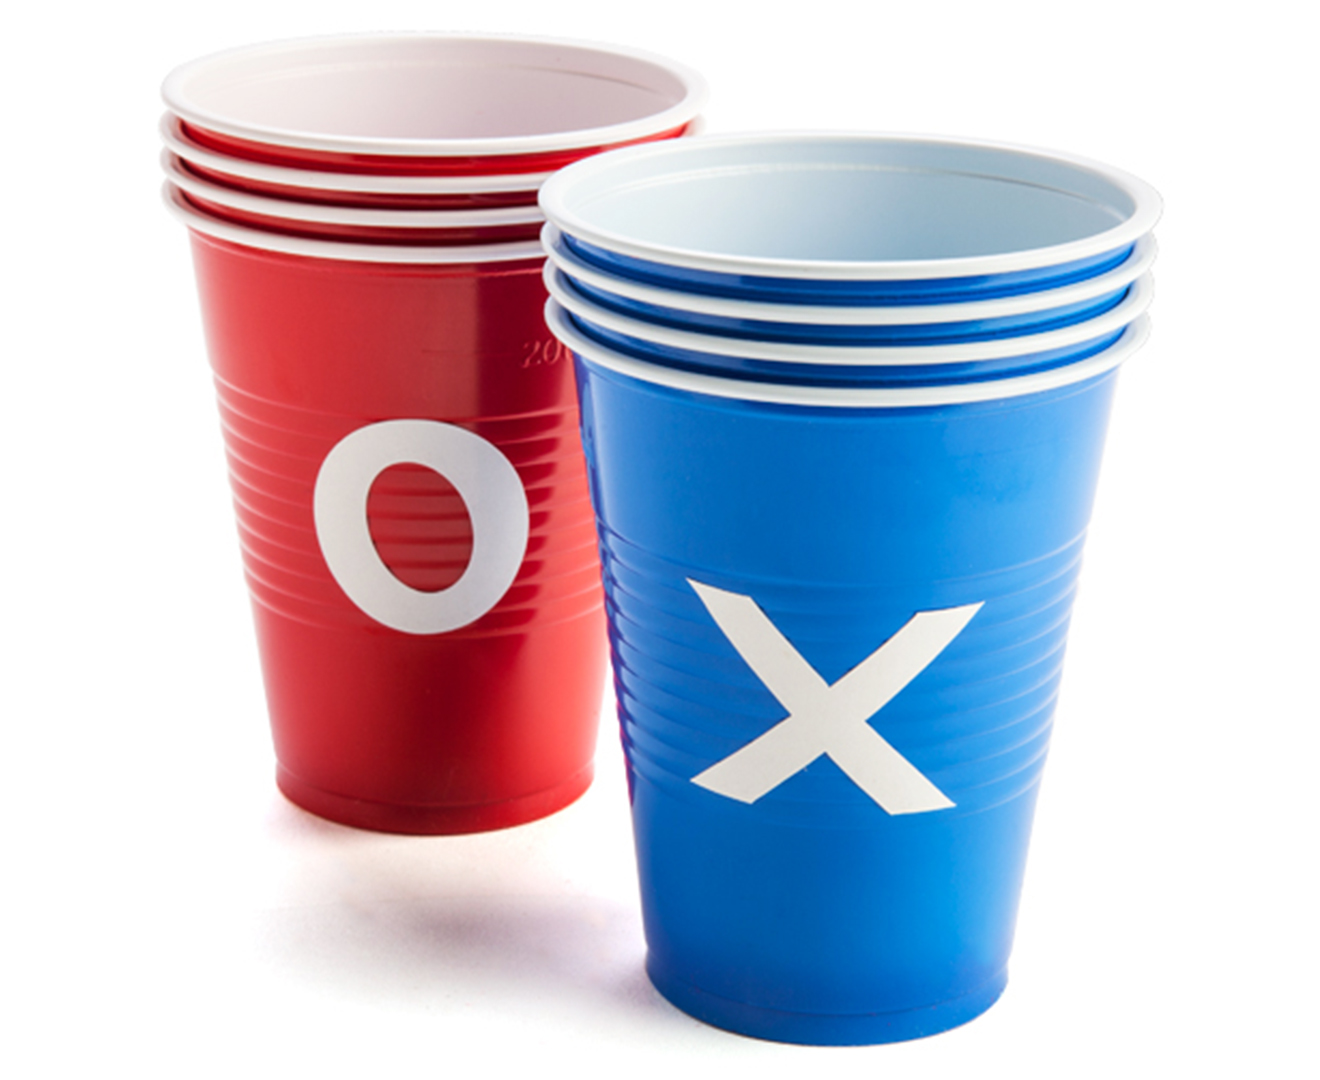 Tic Tac Toe Drinking Cup Game Catch.co.nz